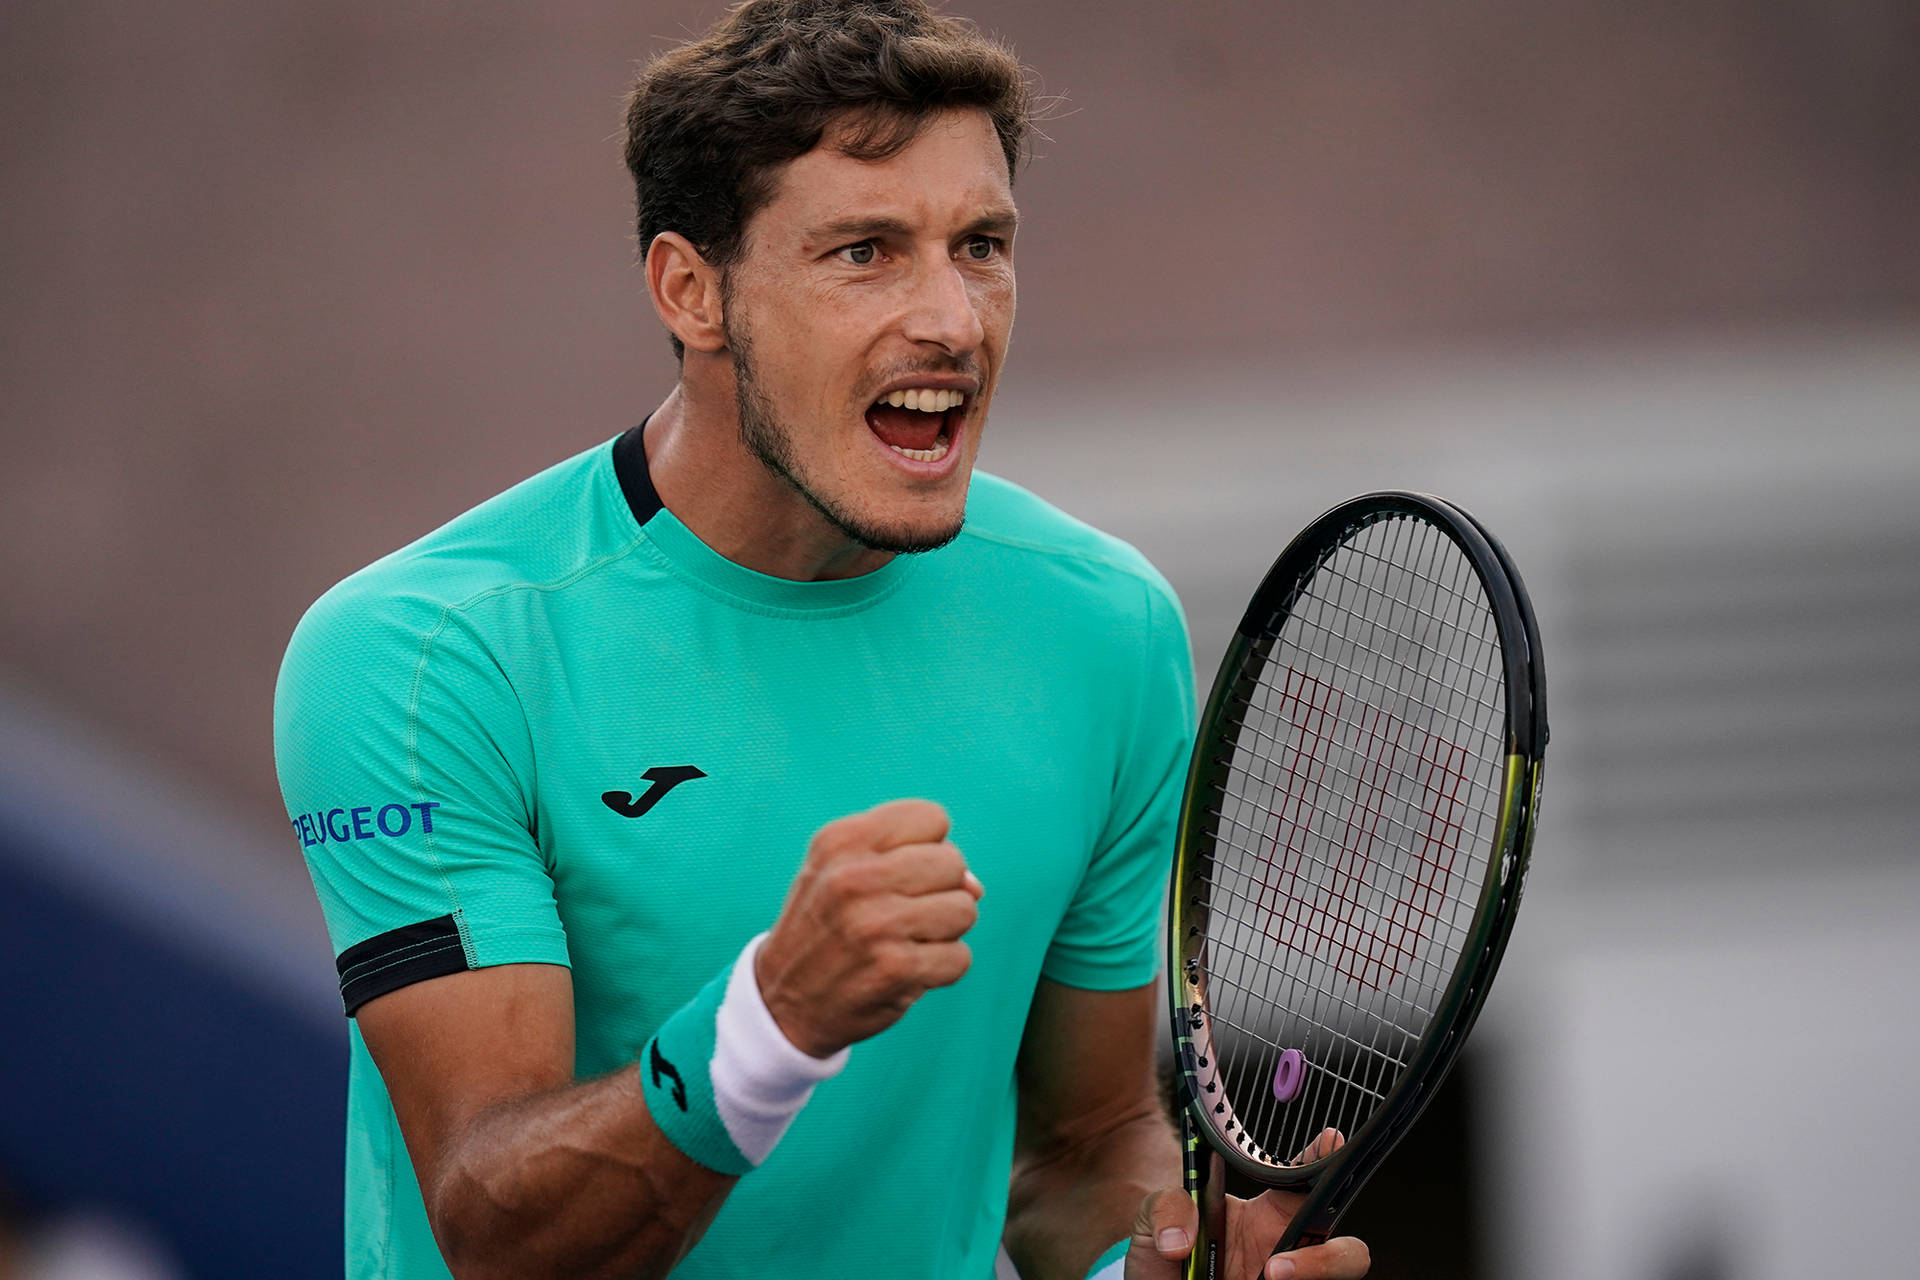 Download Pablo Carreno Busta Feeling Thrilled Wallpaper | Wallpapers.com